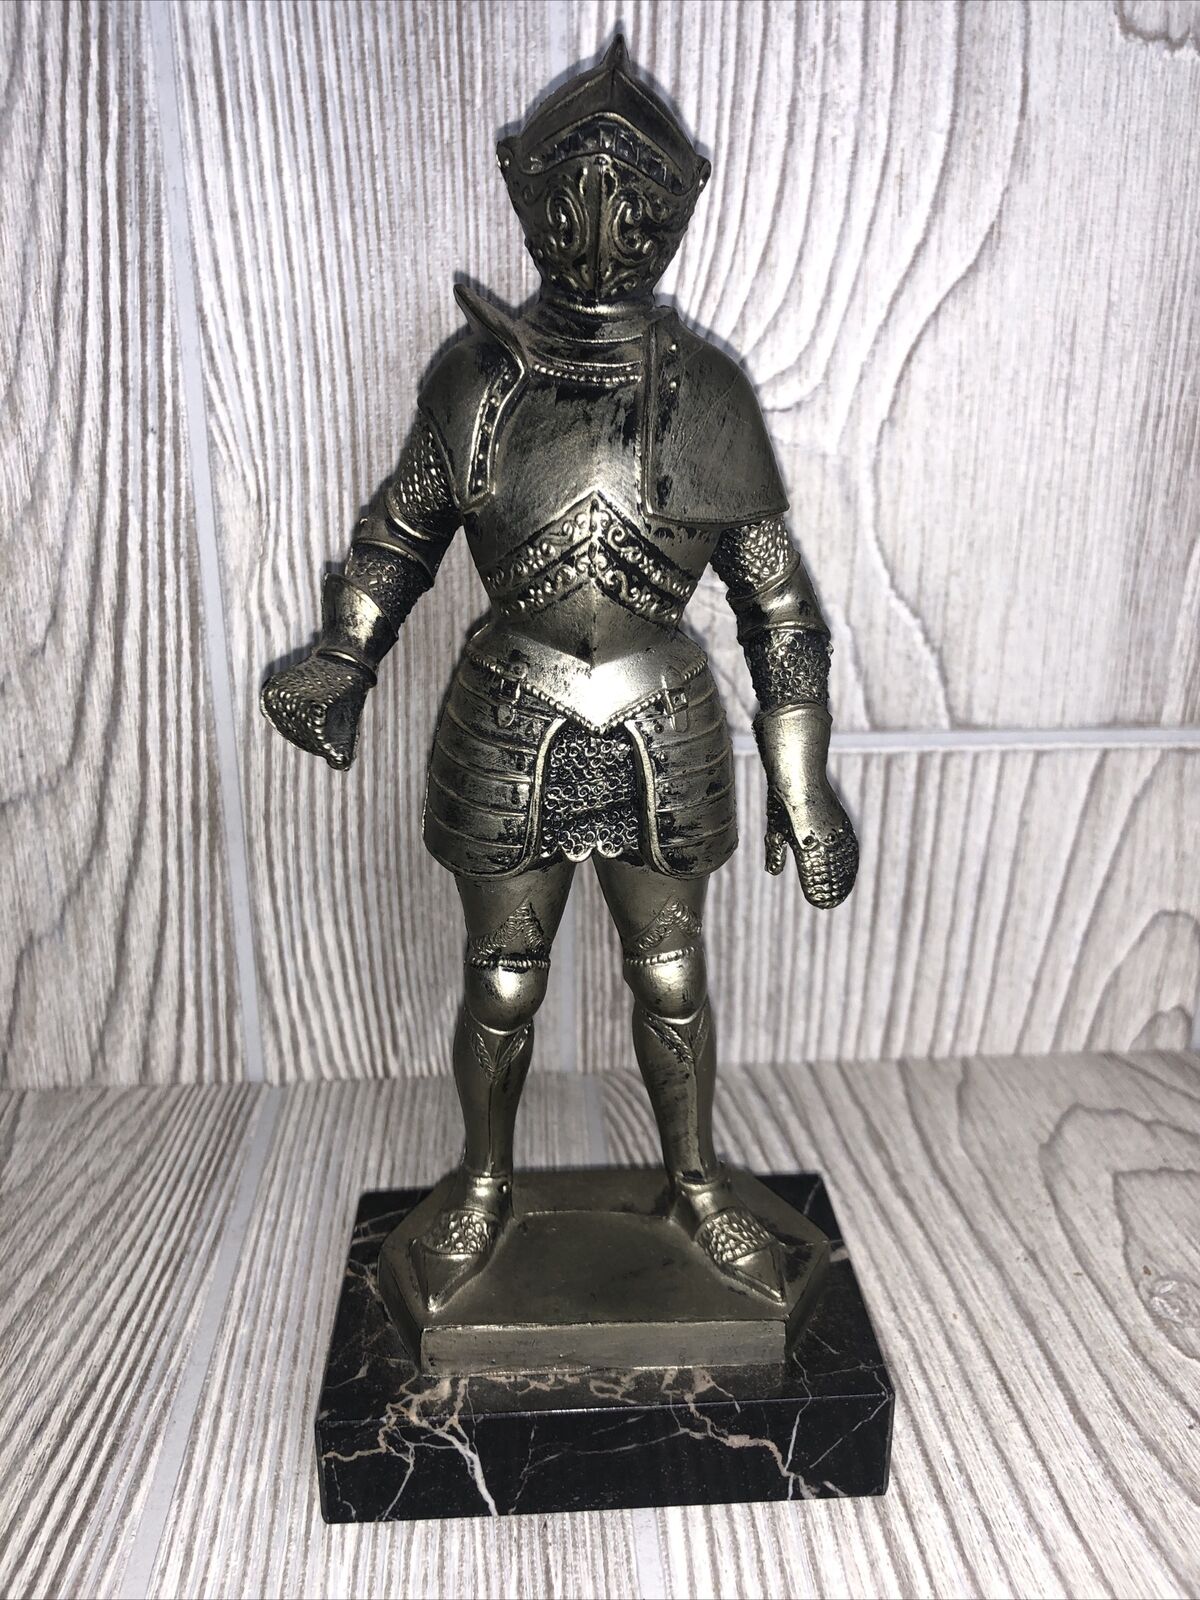 VINTAGE GENUINE CARRARA MARBLE KNIGHT STATUE FIGURINE MADE IN ITALY MARKED